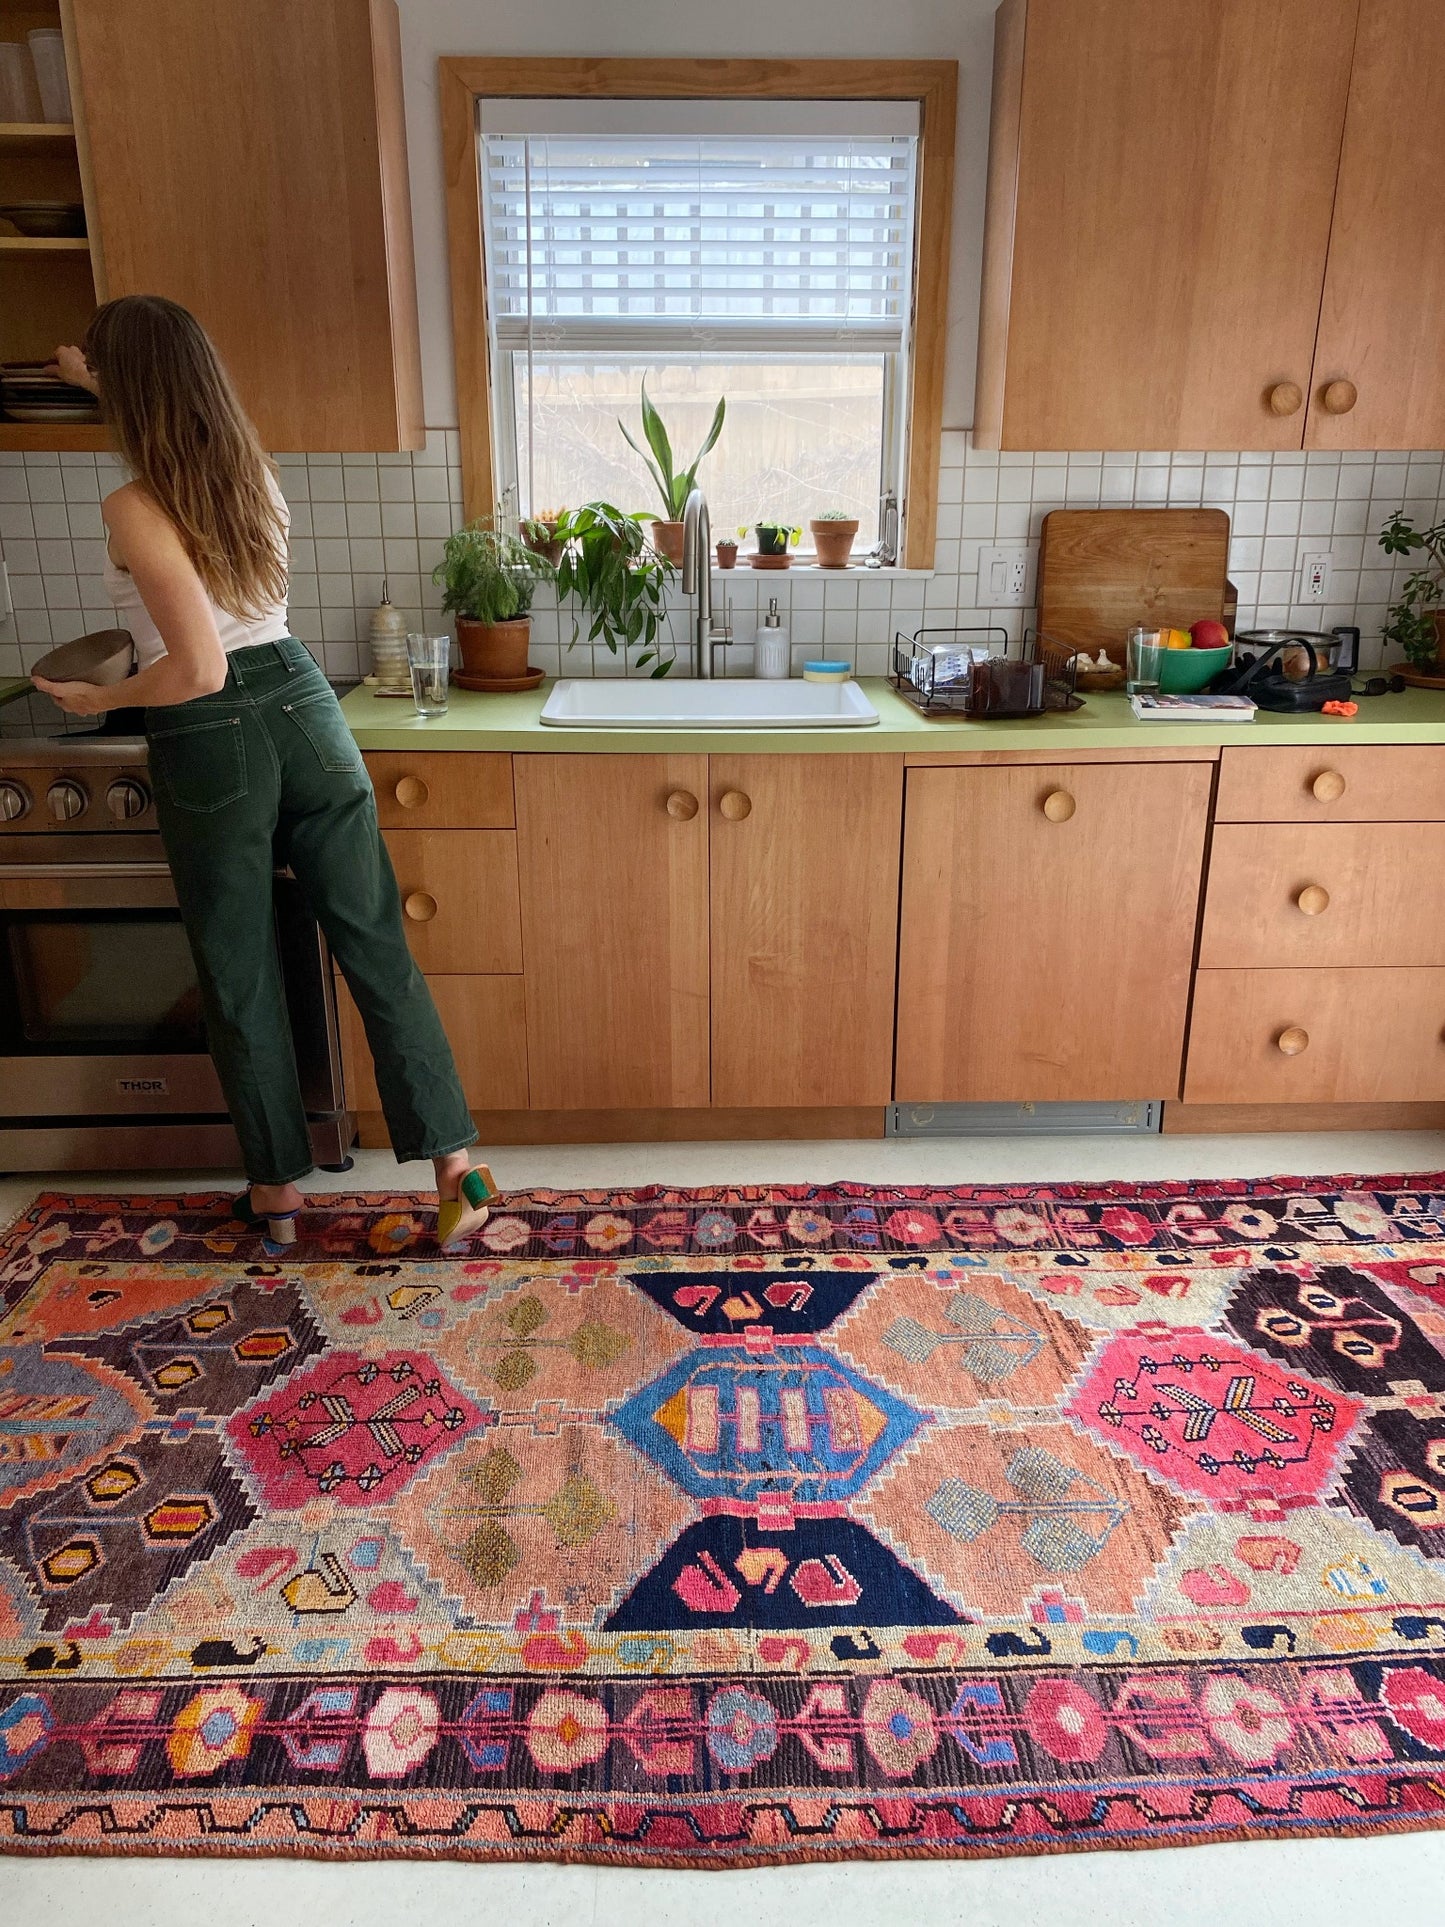 Style Palmetto Vintage Persian Rug in a Kitchen